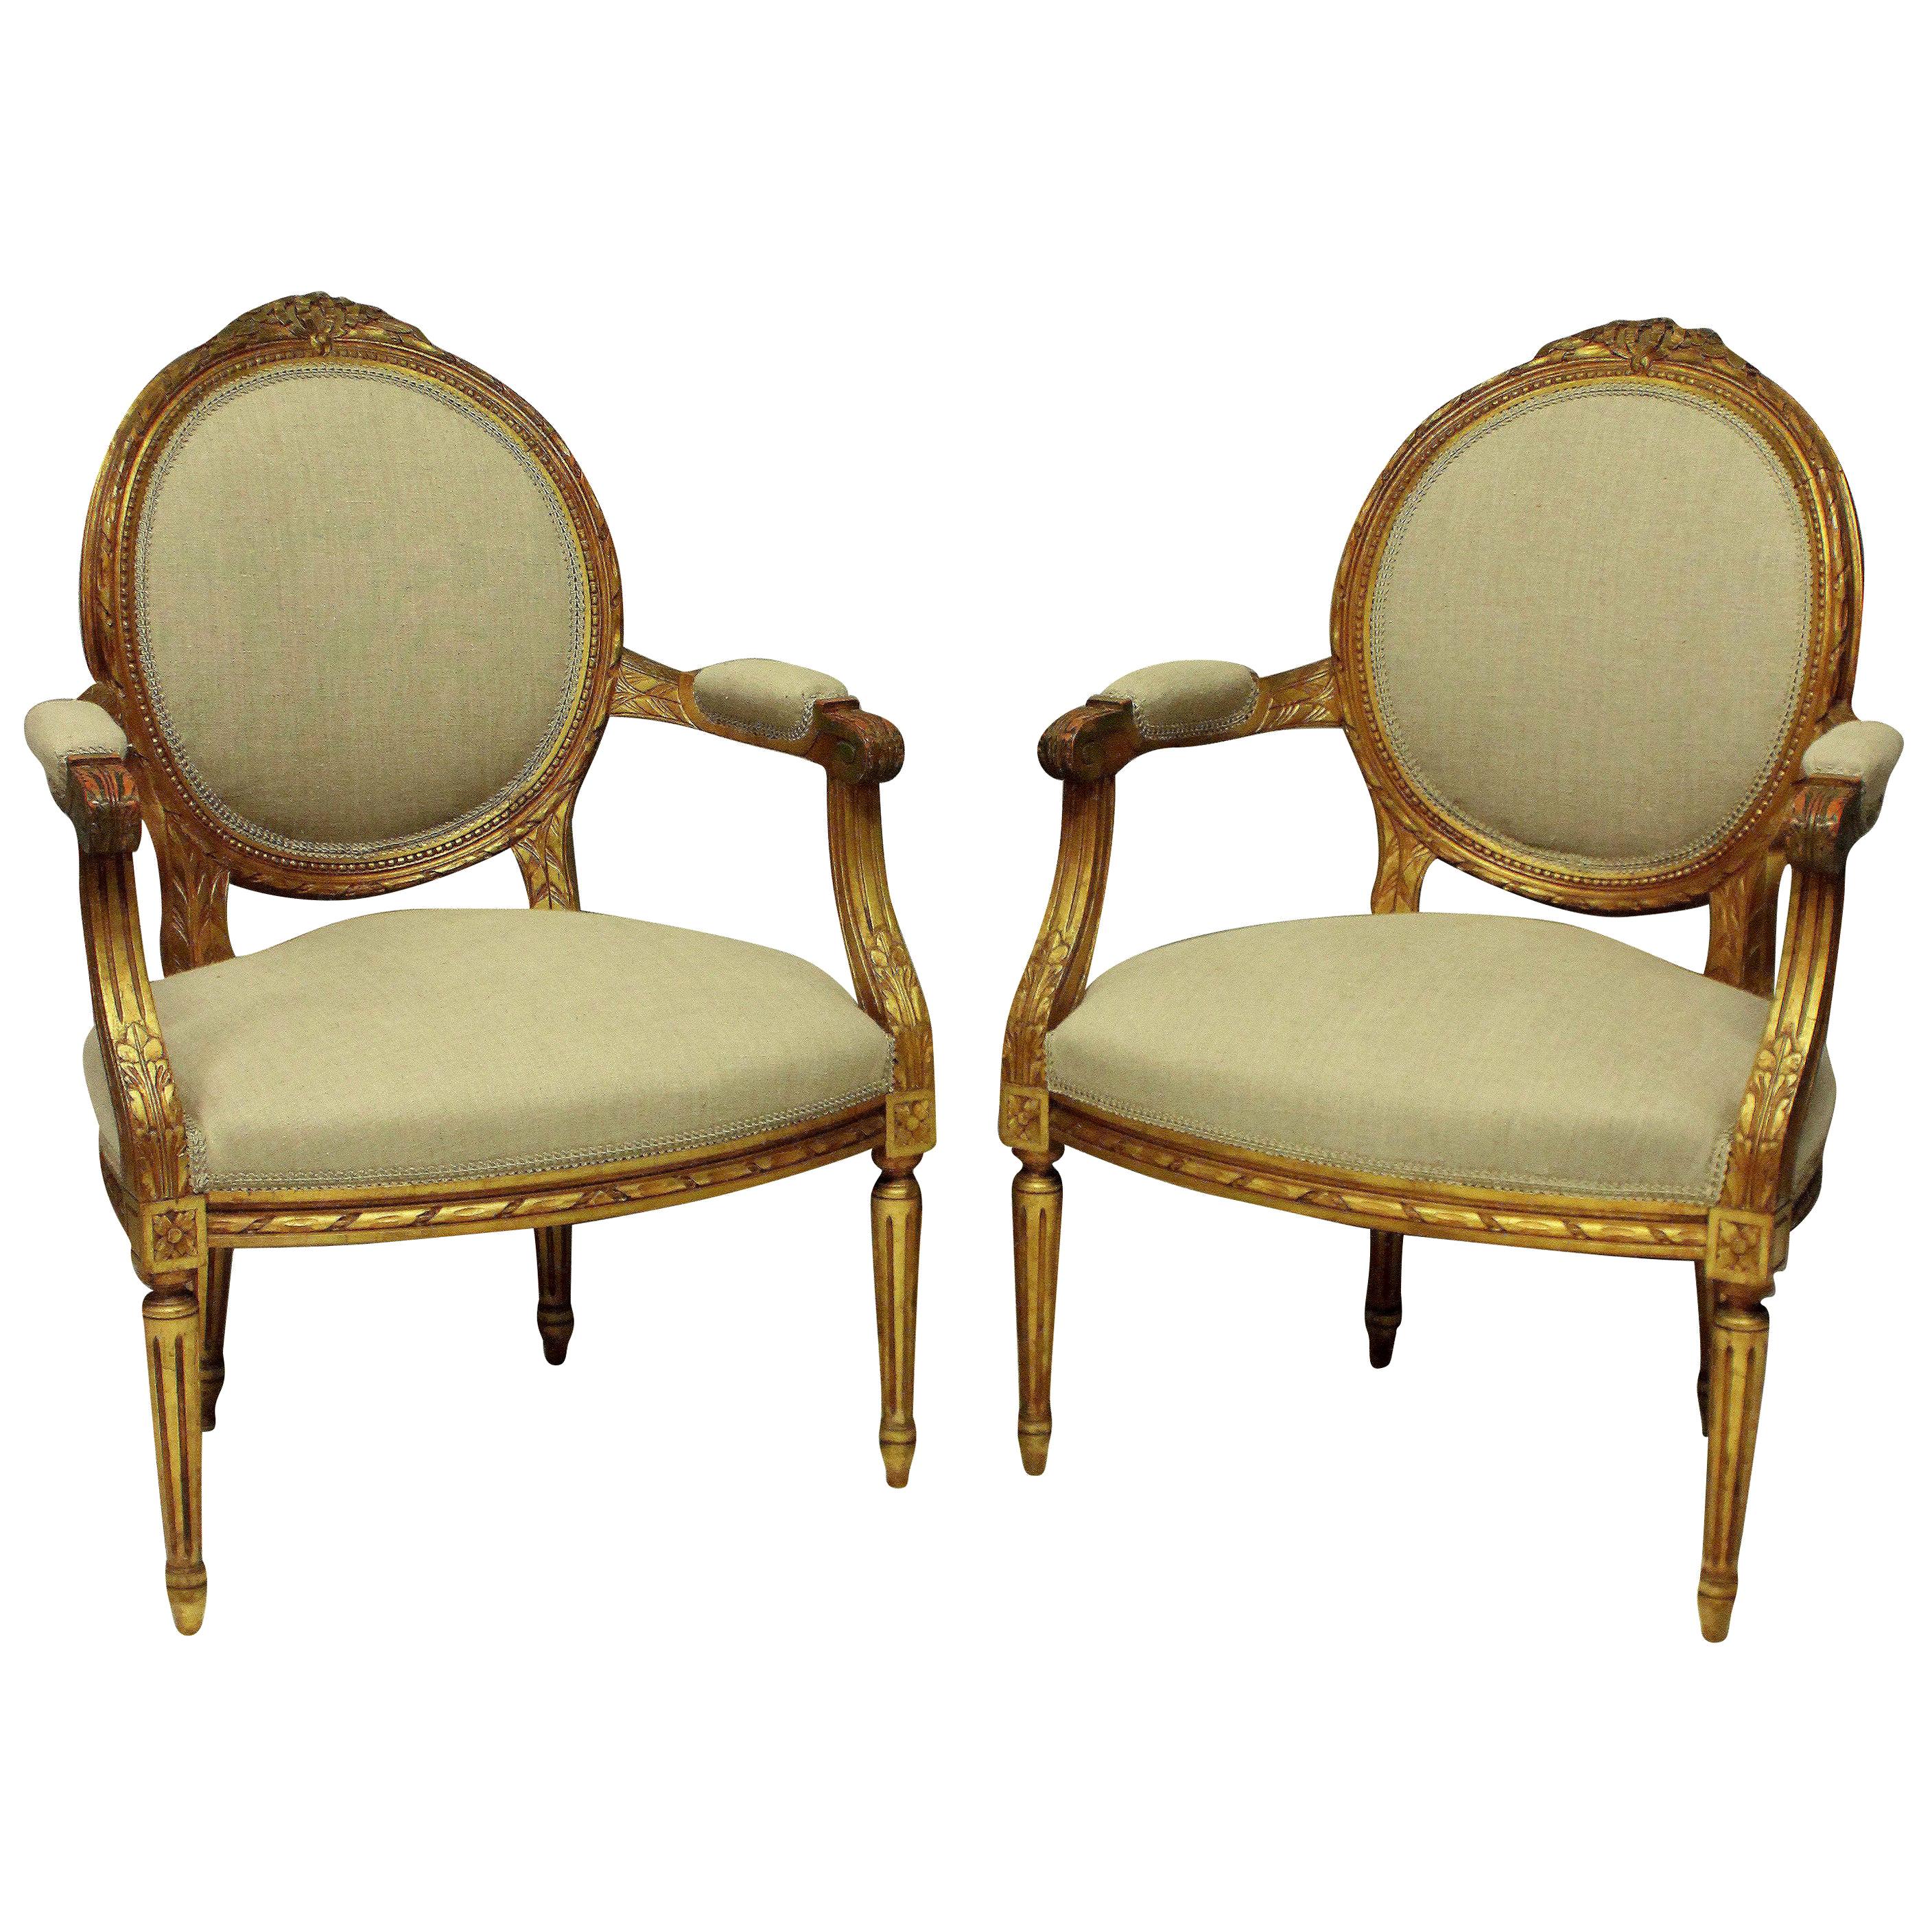 Pair of Louis XV Style Giltwood Armchairs